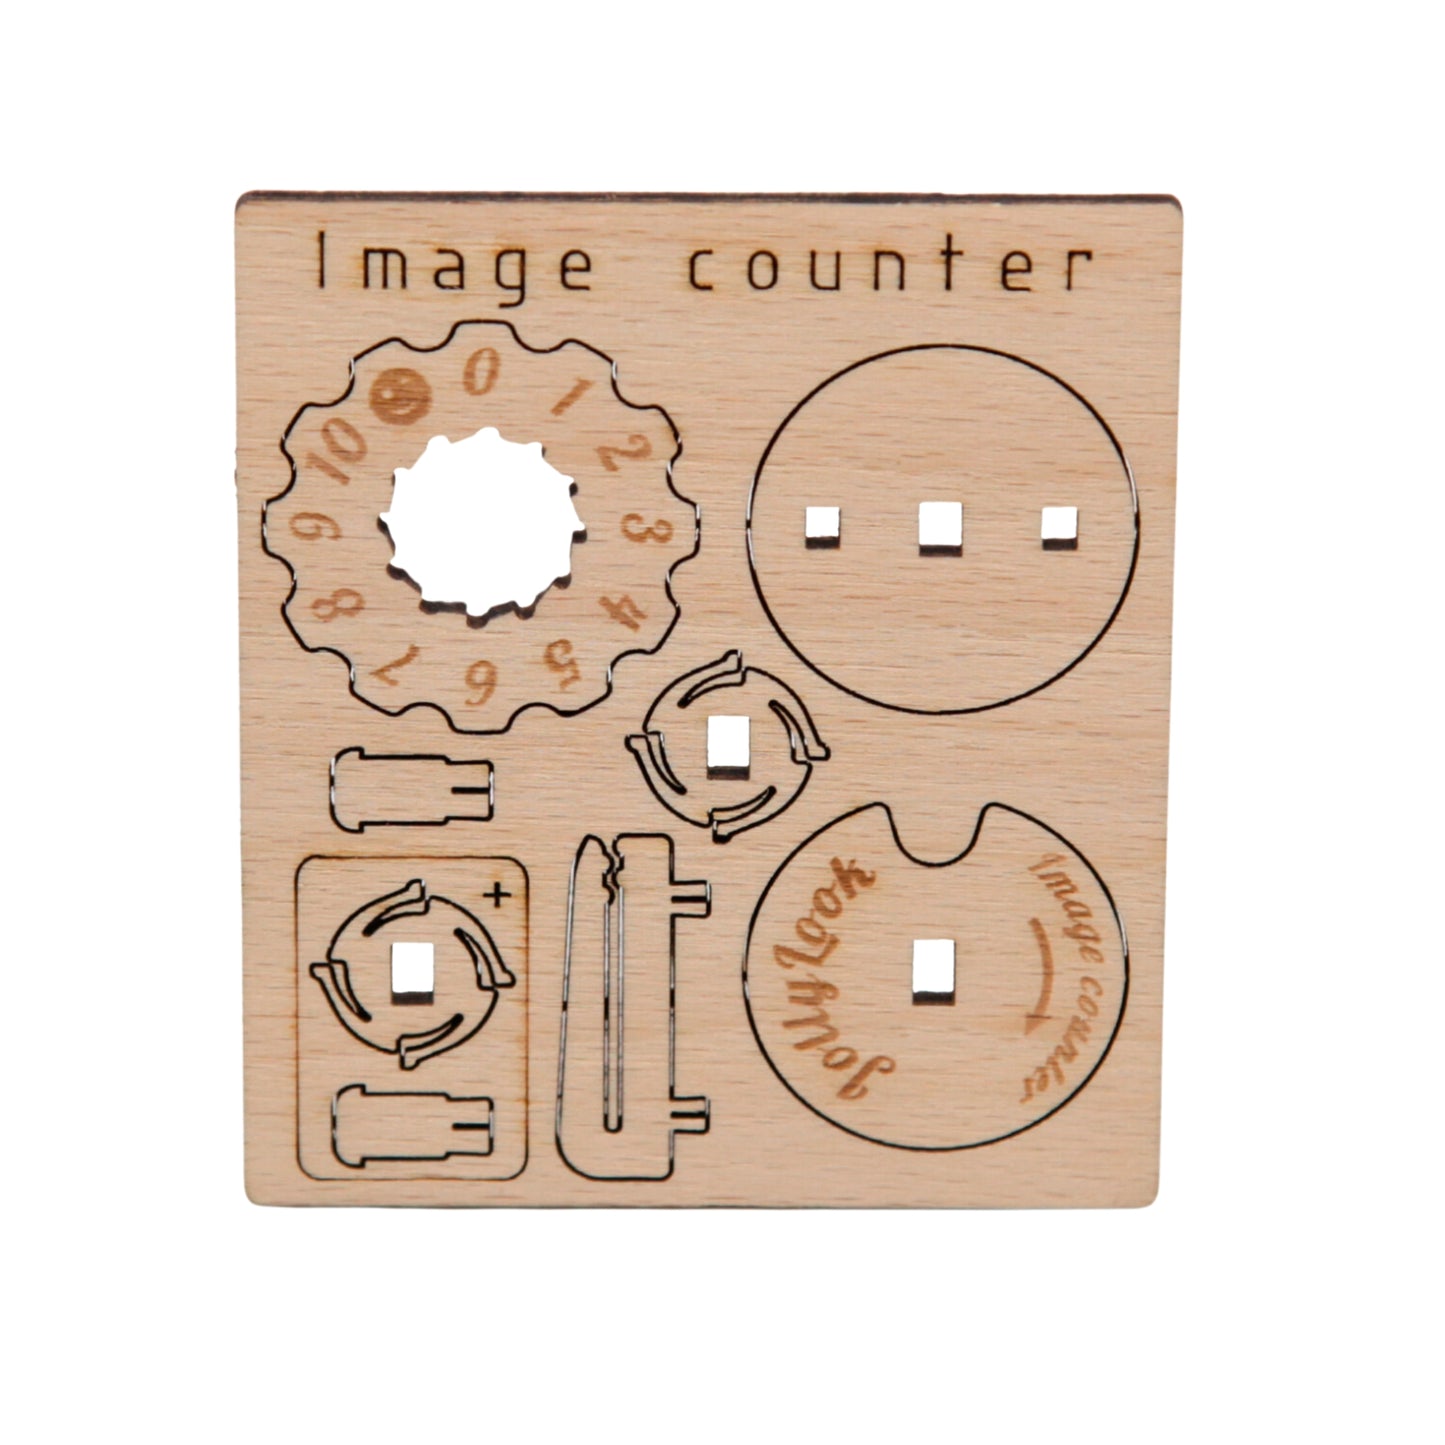 Unassembled wooden image counter in Natural Wood Color featuring the Jollylook logo for keeping track of how many images remain in your Instax film cartridge